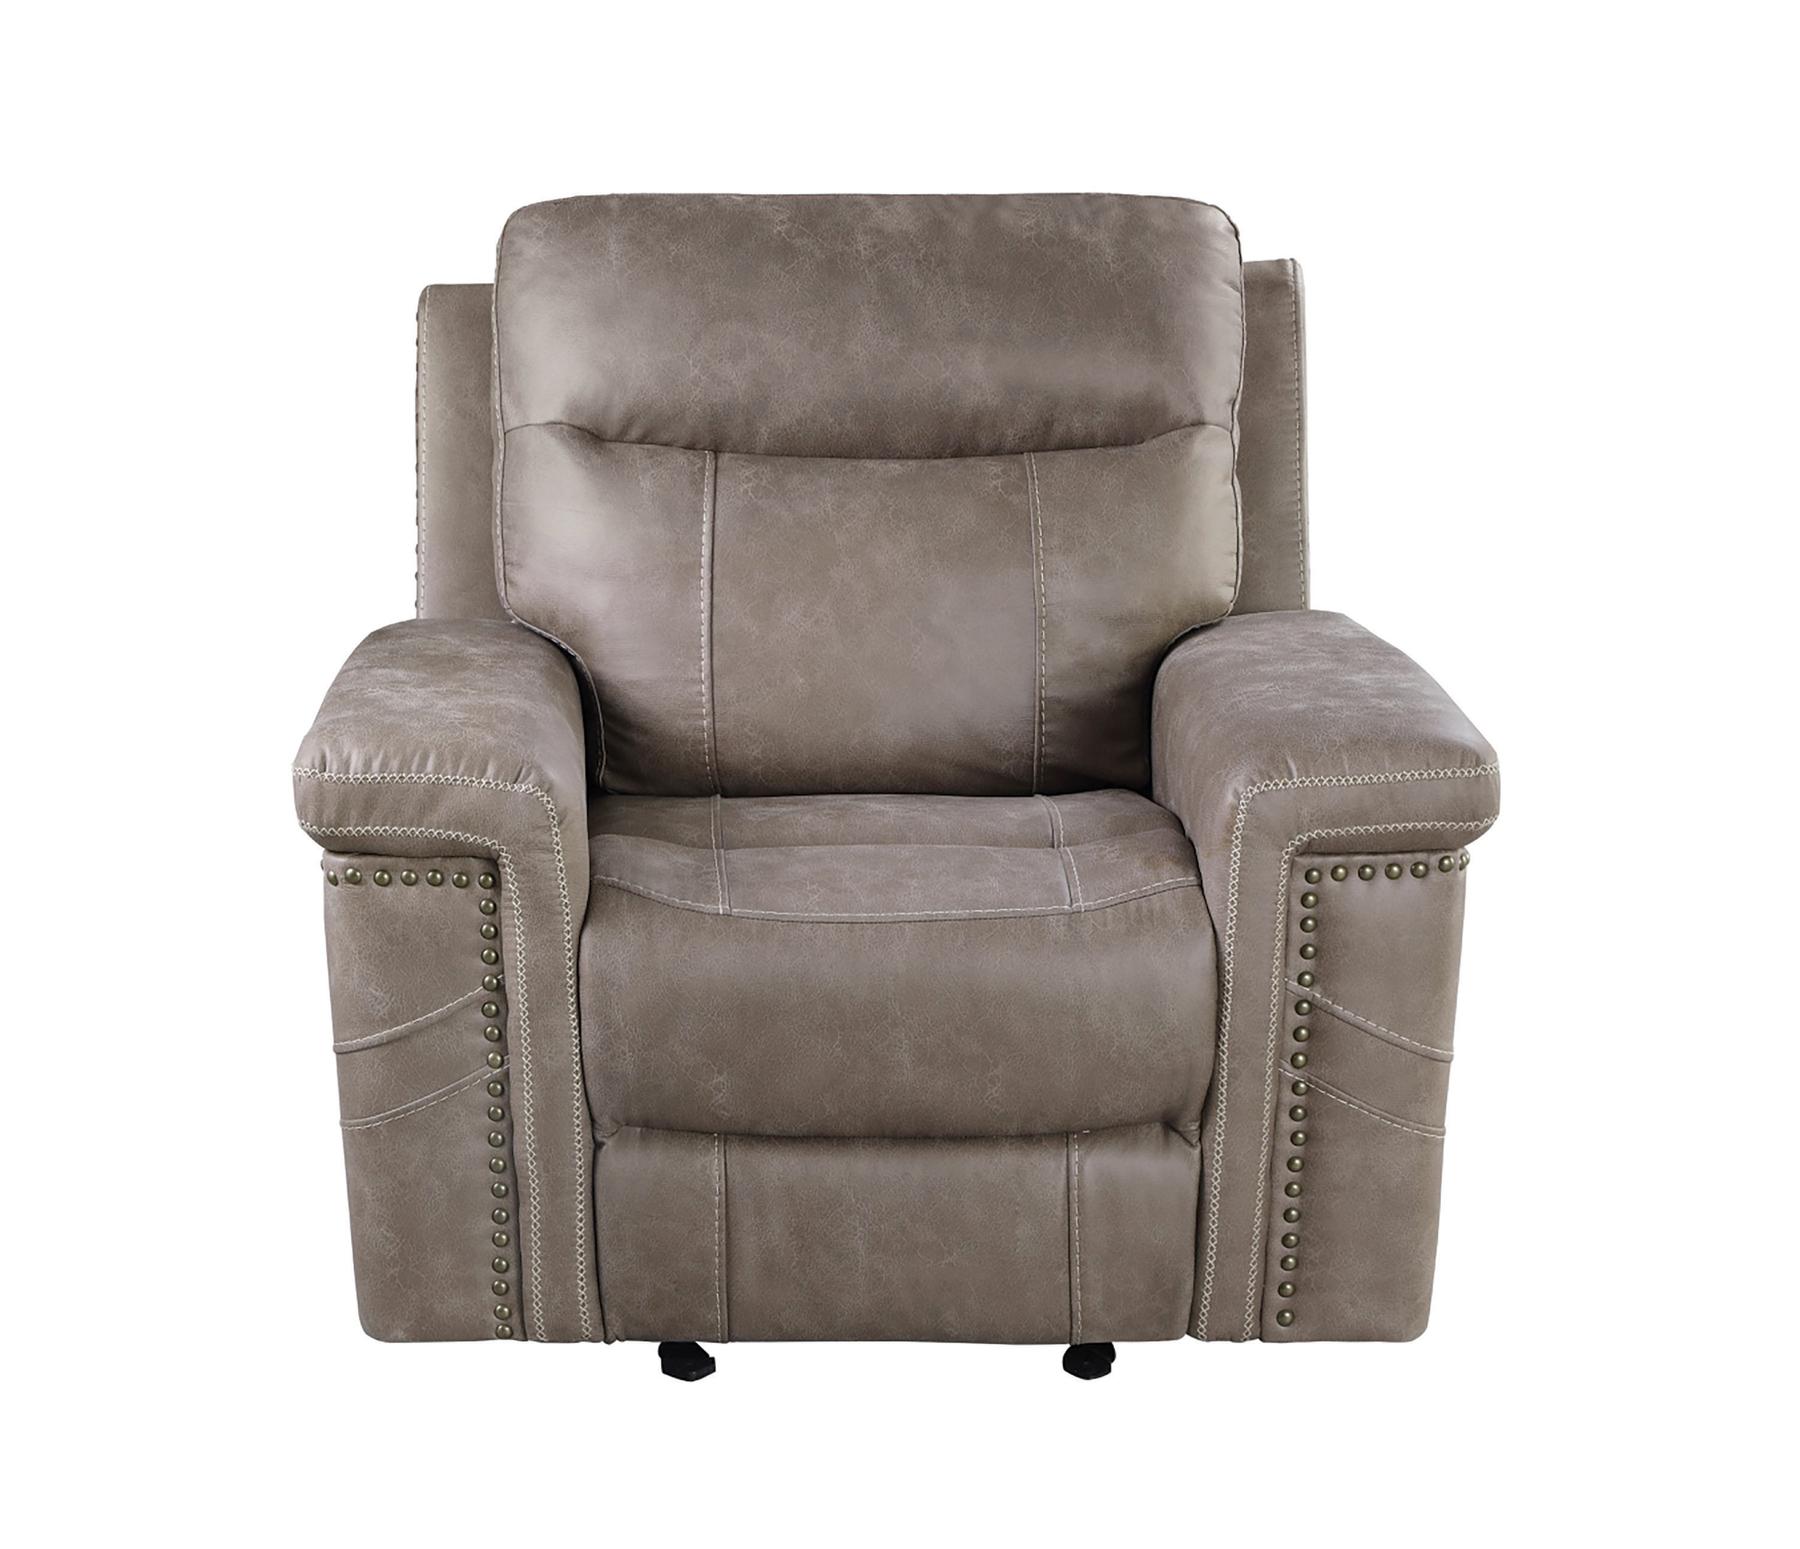 Modern Power recliner 603519PP Wixom 603519PP in Taupe 